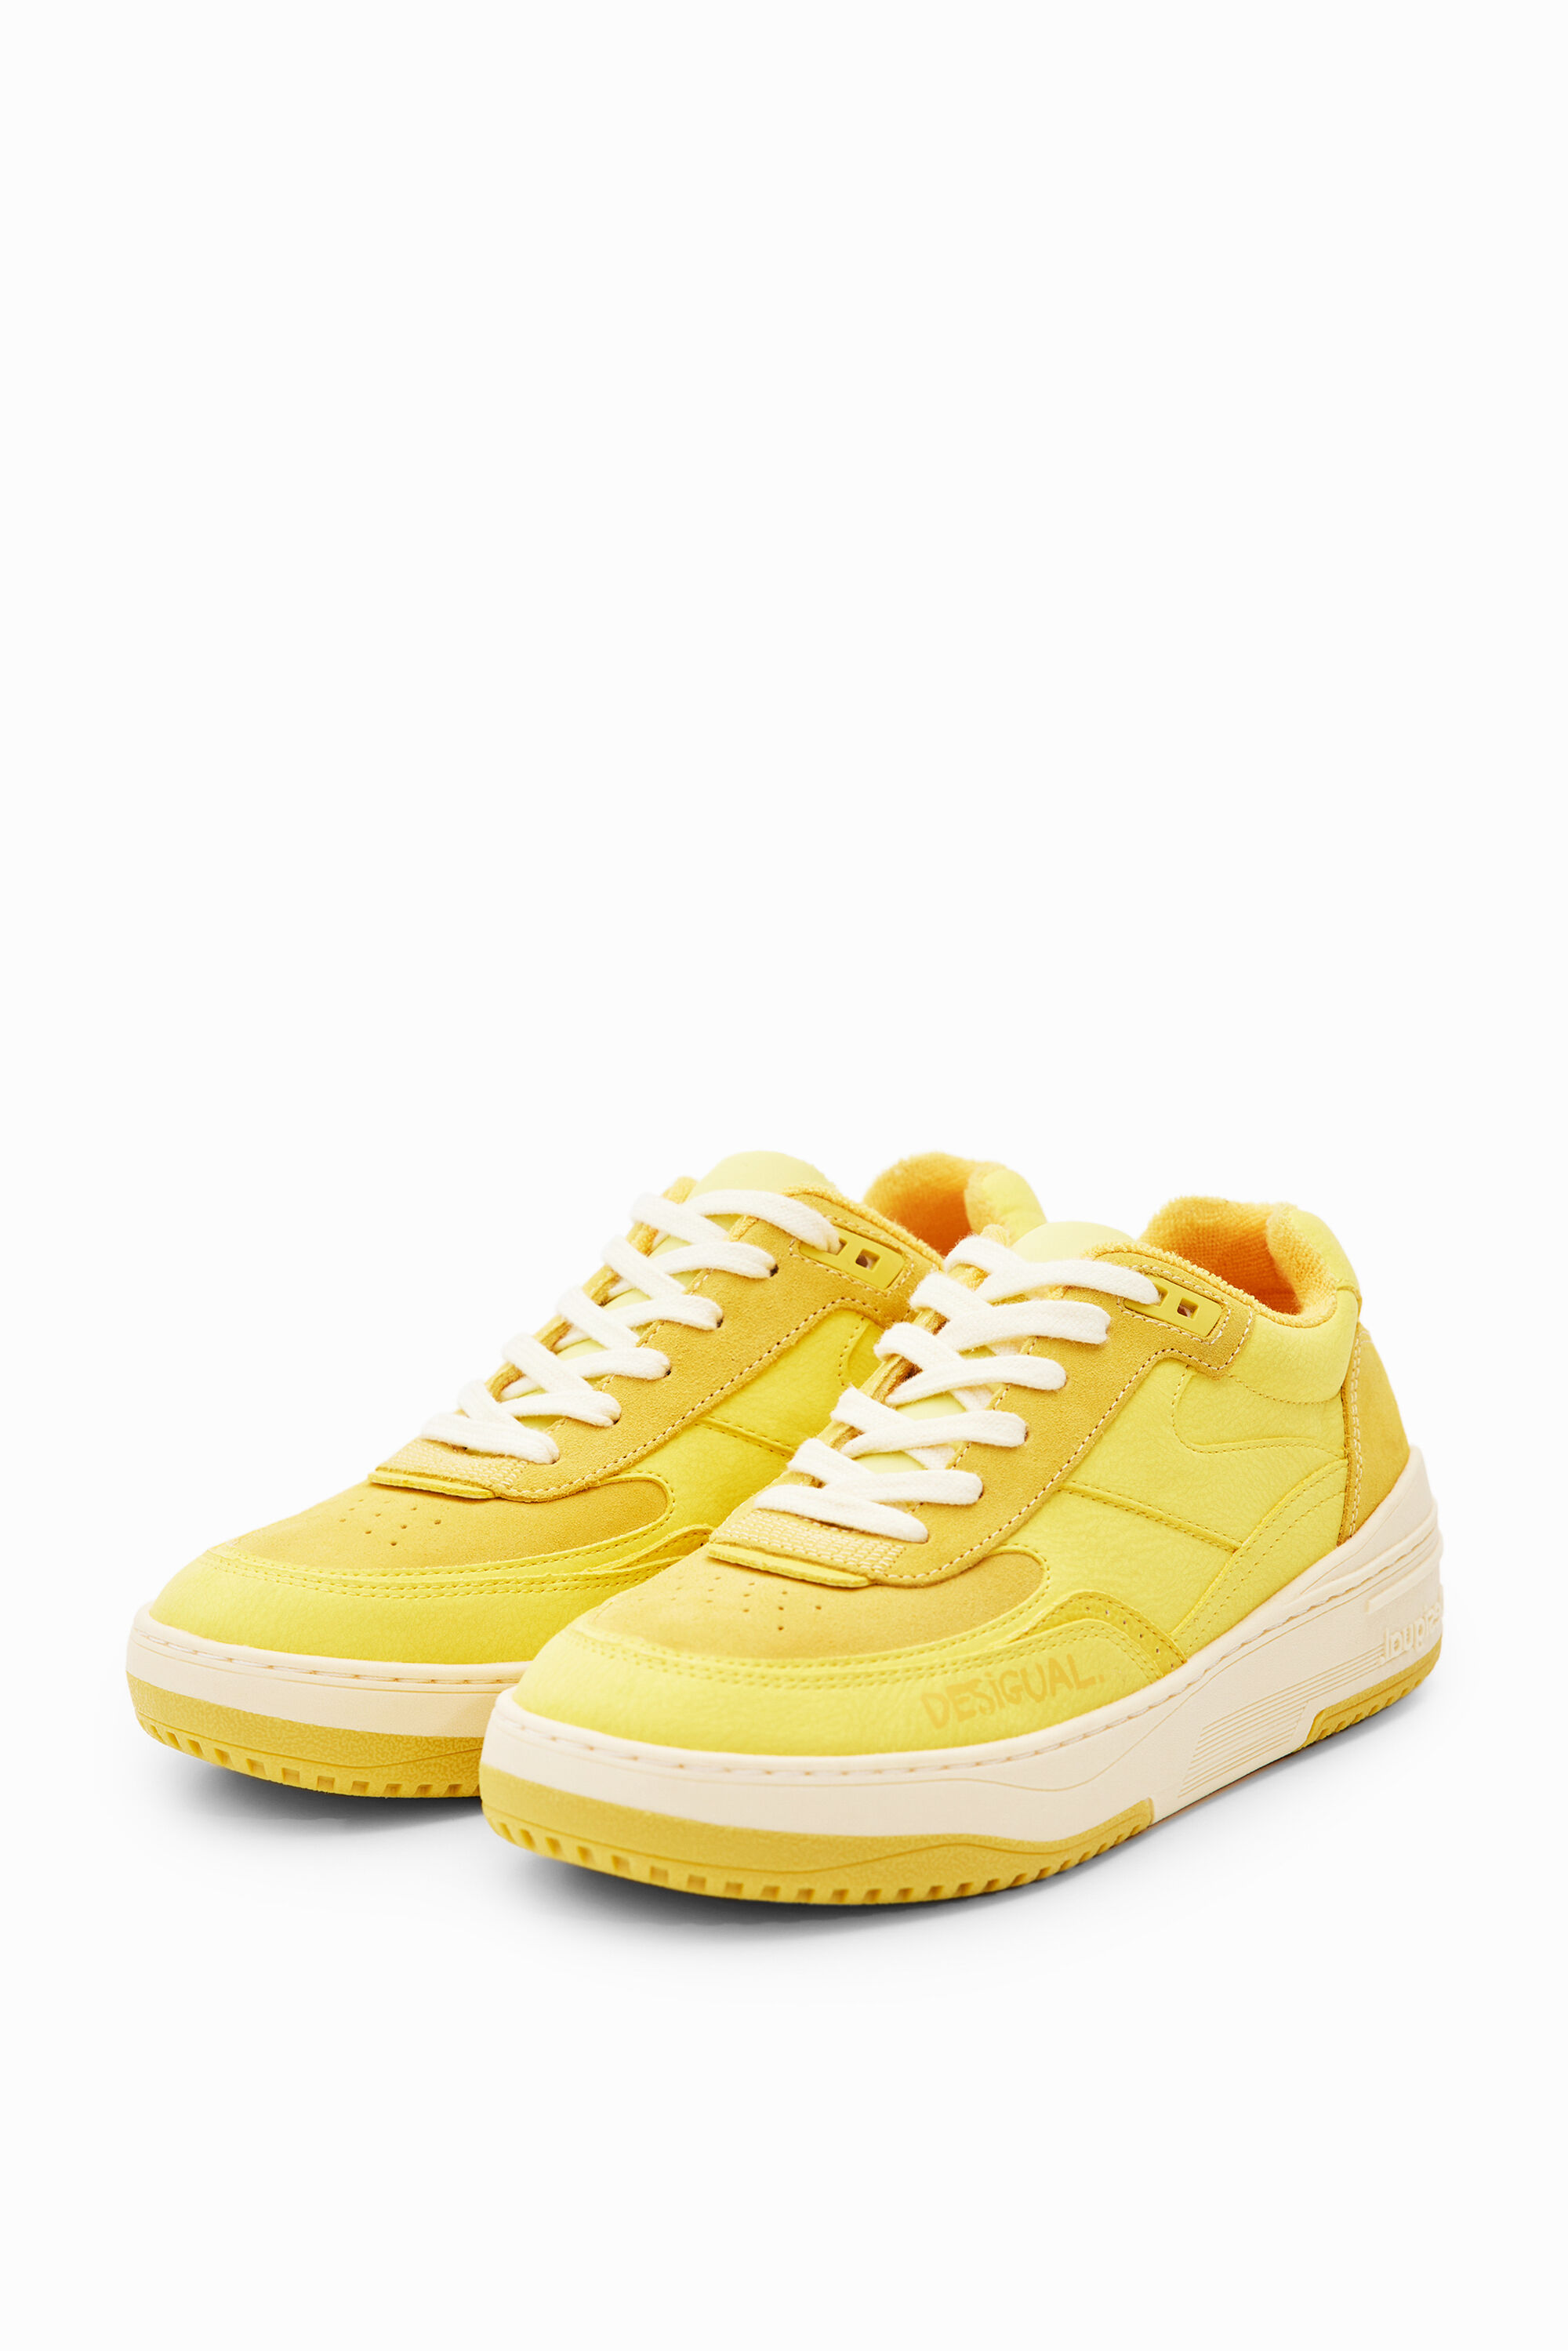 Retro chunky patchwork sneakers - YELLOW - 38